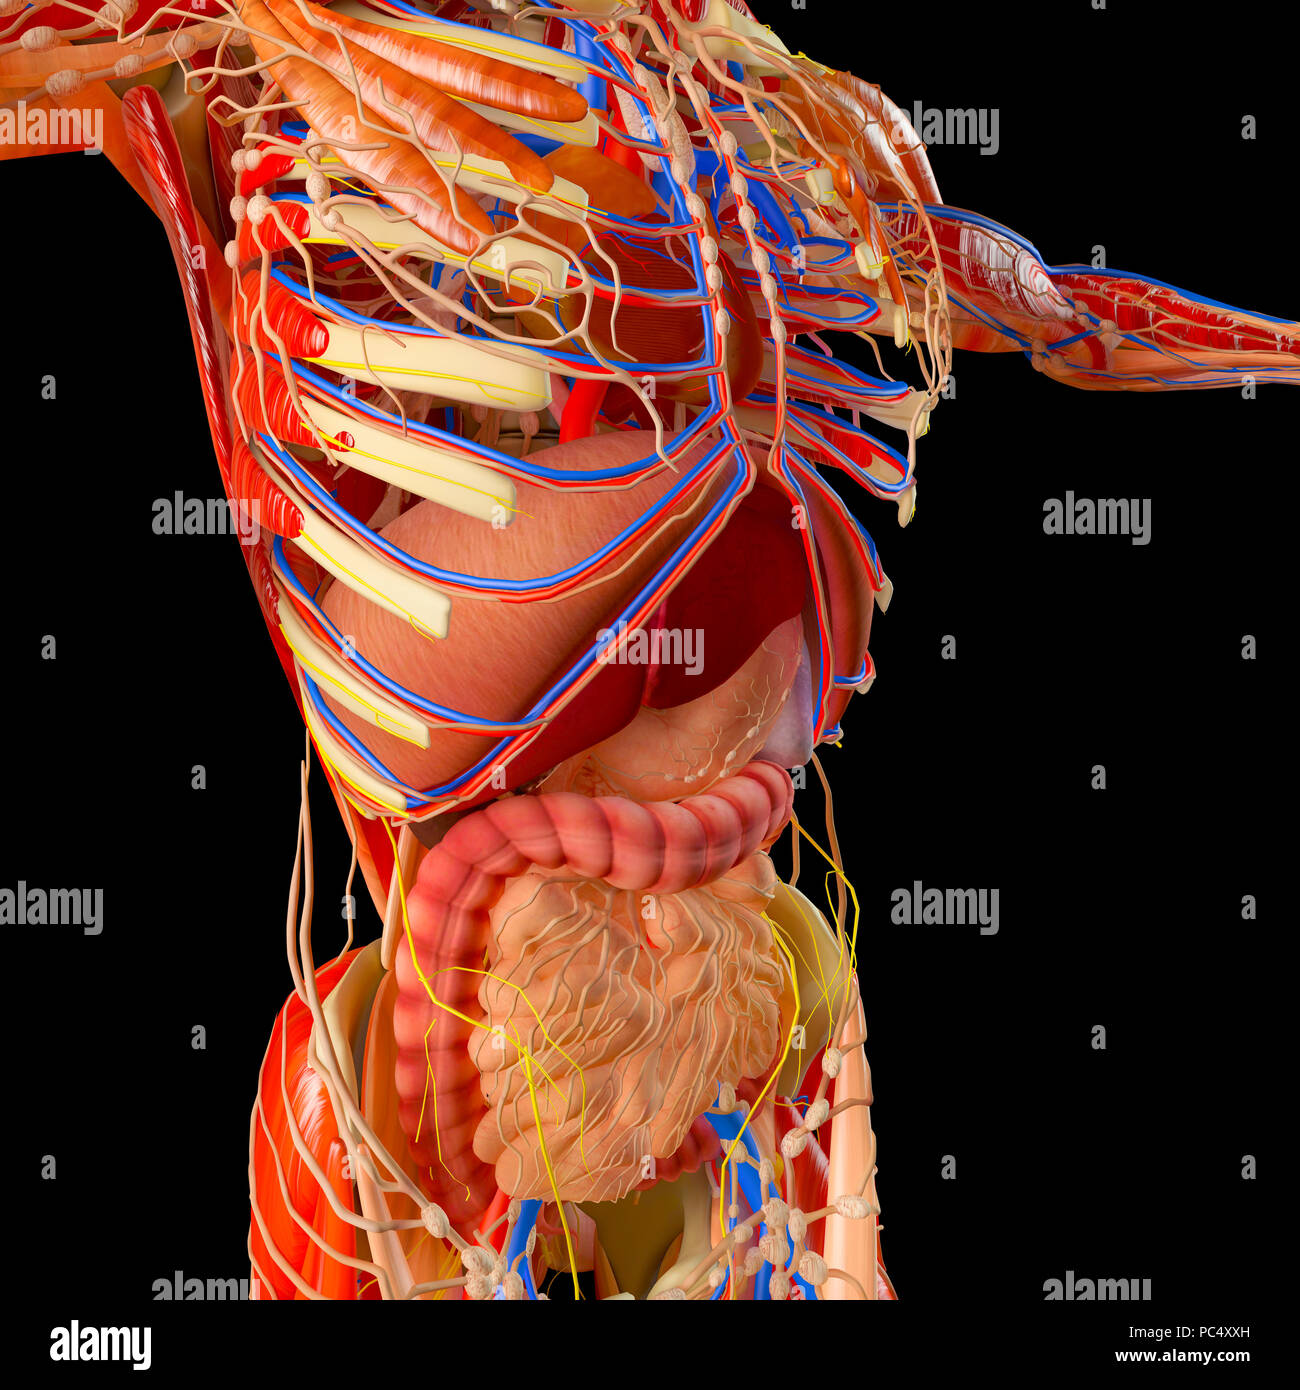 Human body, muscular system, digestive system, anatomy. Stomach, esophagus, duodenum, colon. Human anatomy Stock Photo